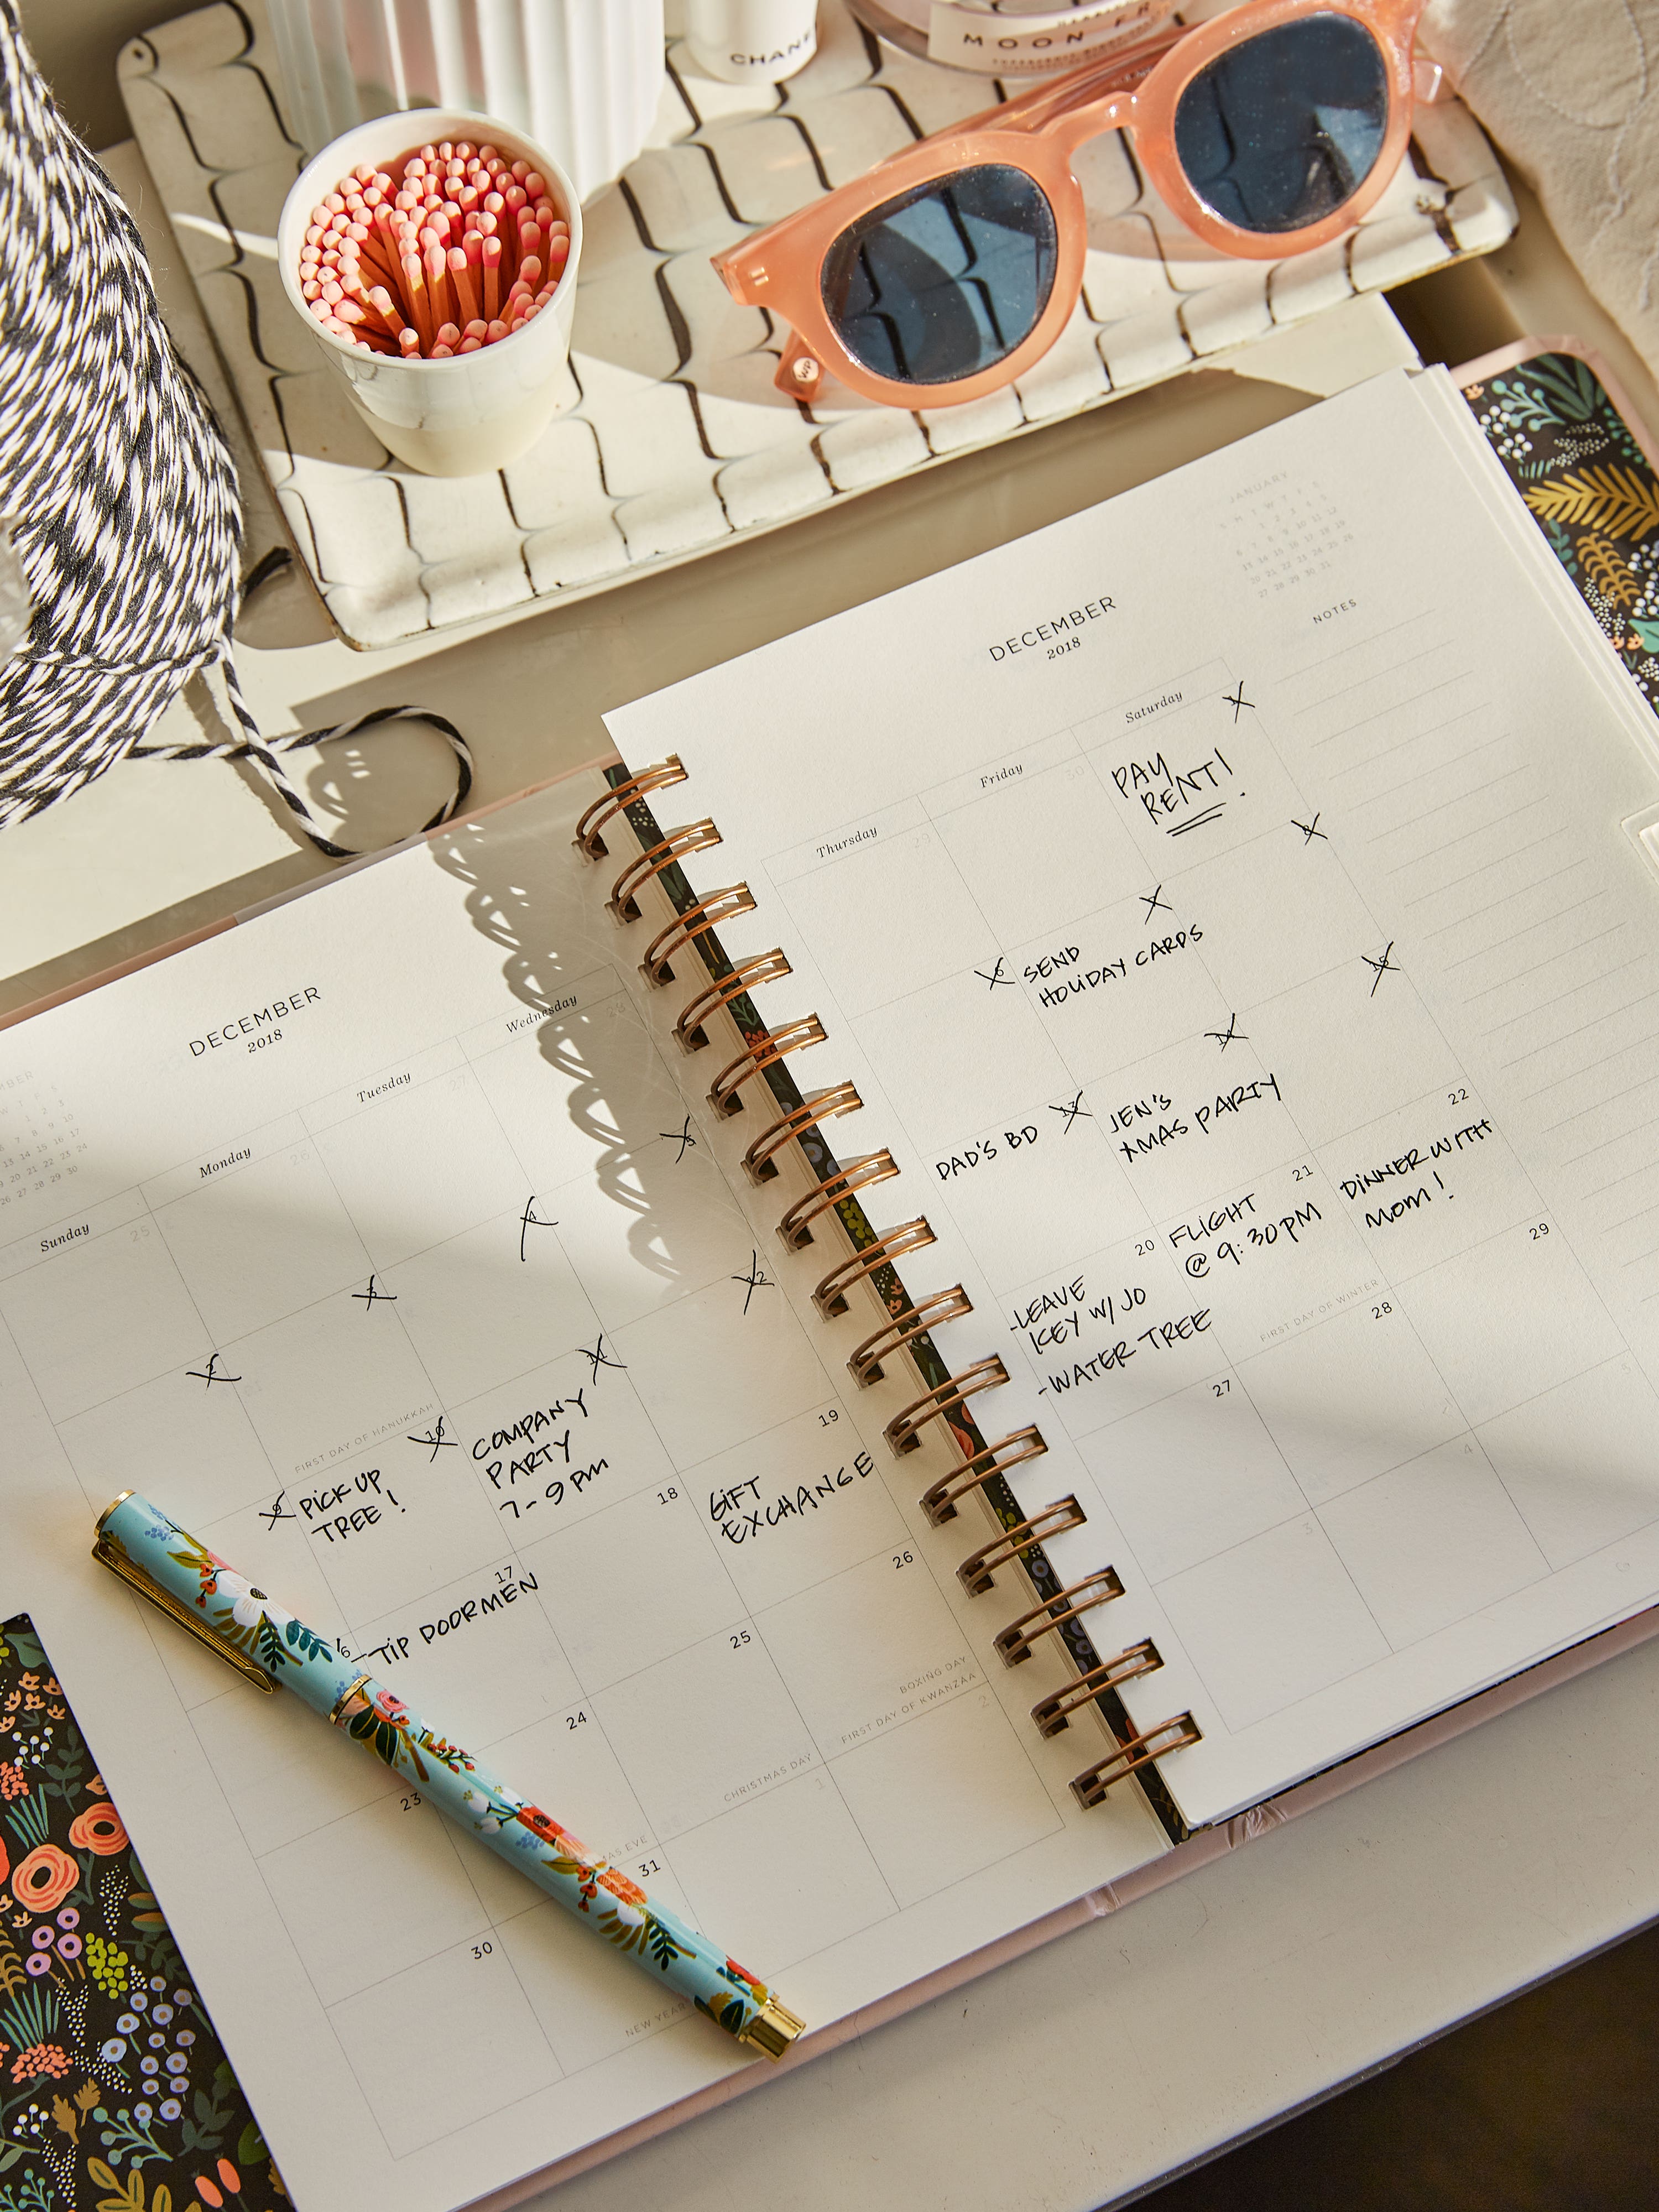 Here’s How a Productivity Expert Plans Out Her Week